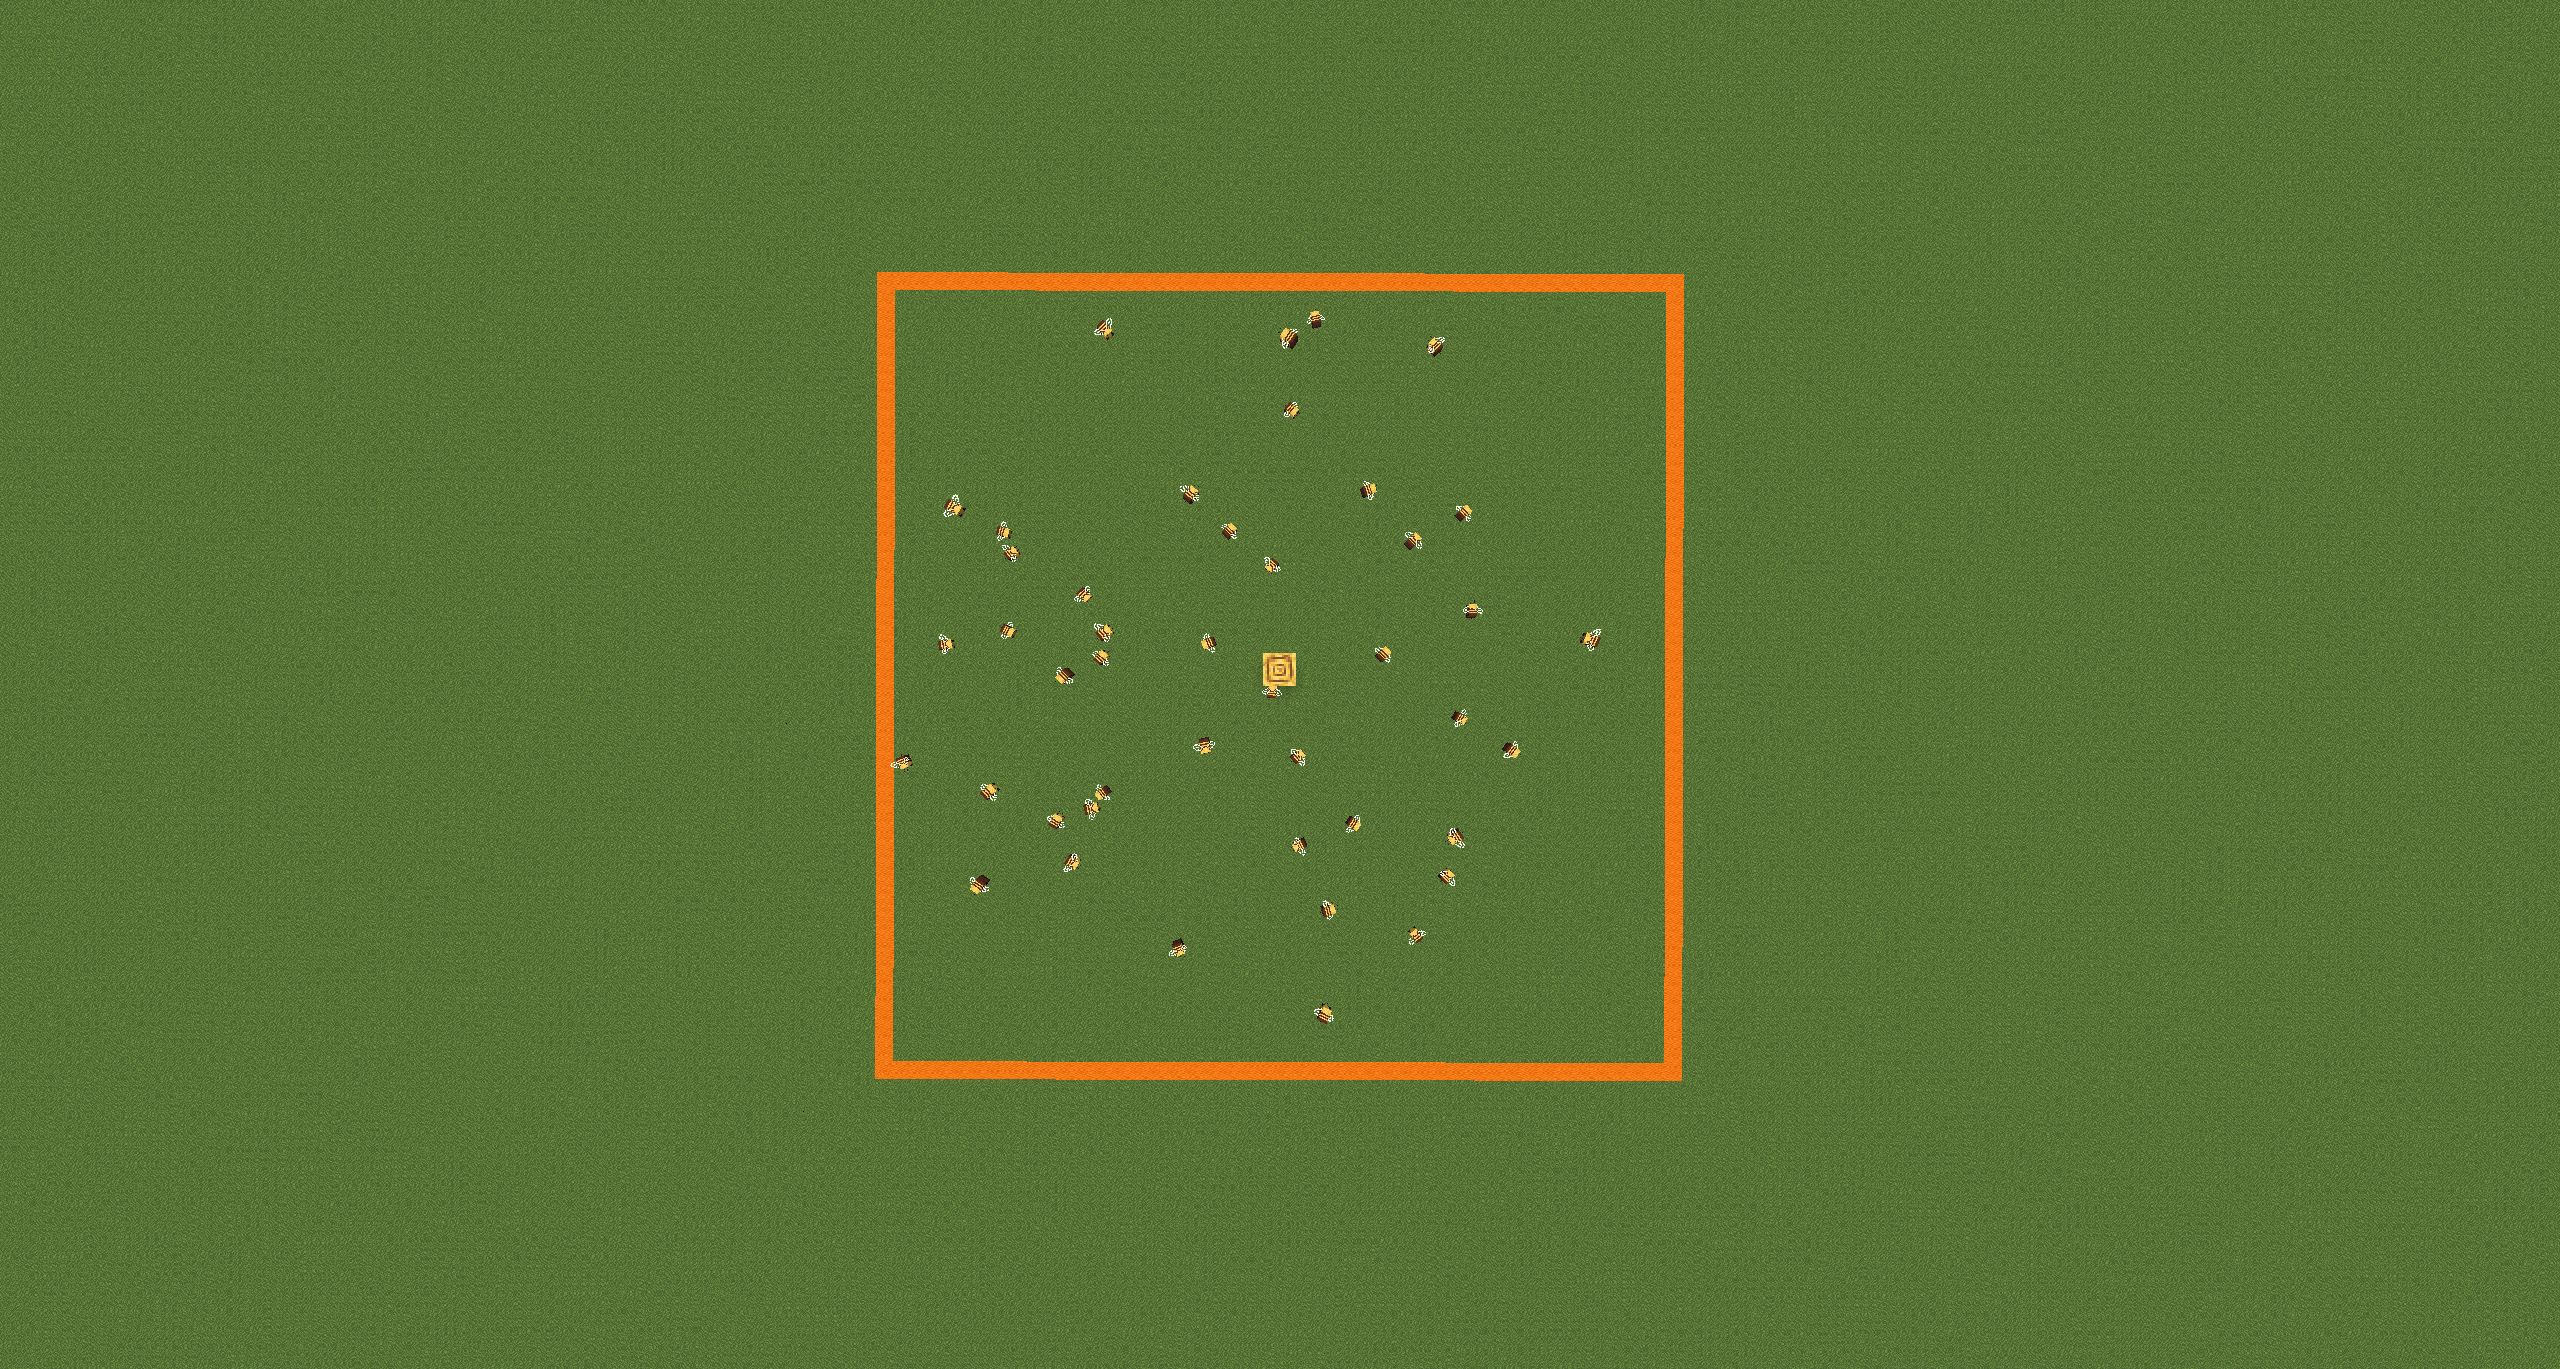 Bees will ONLY wander in a 22 block radius around their hives looking for any nearby flowers as officially intended, but with no caveats! If they exit this range for any reason, they will do their best to path back. Pack in screenshot is Brush-Up! 